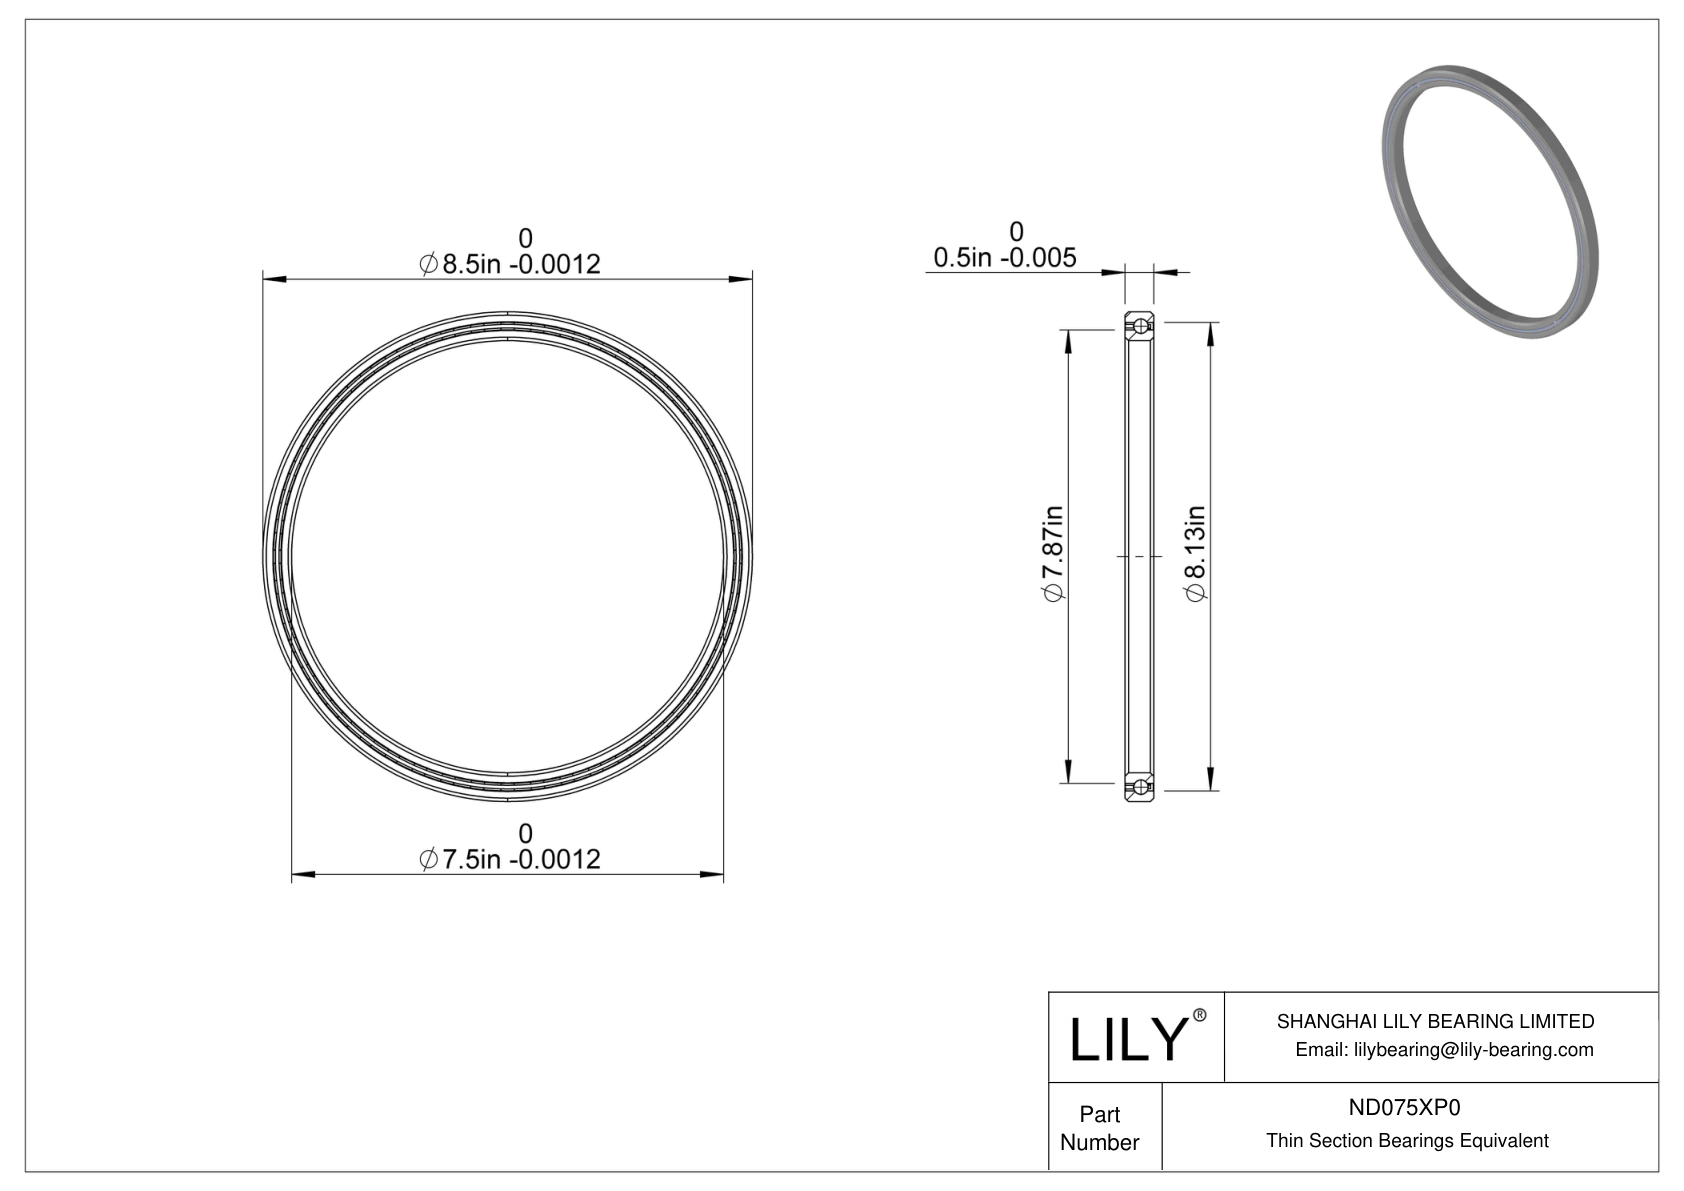 ND075XP0 Constant Section (CS) Bearings cad drawing